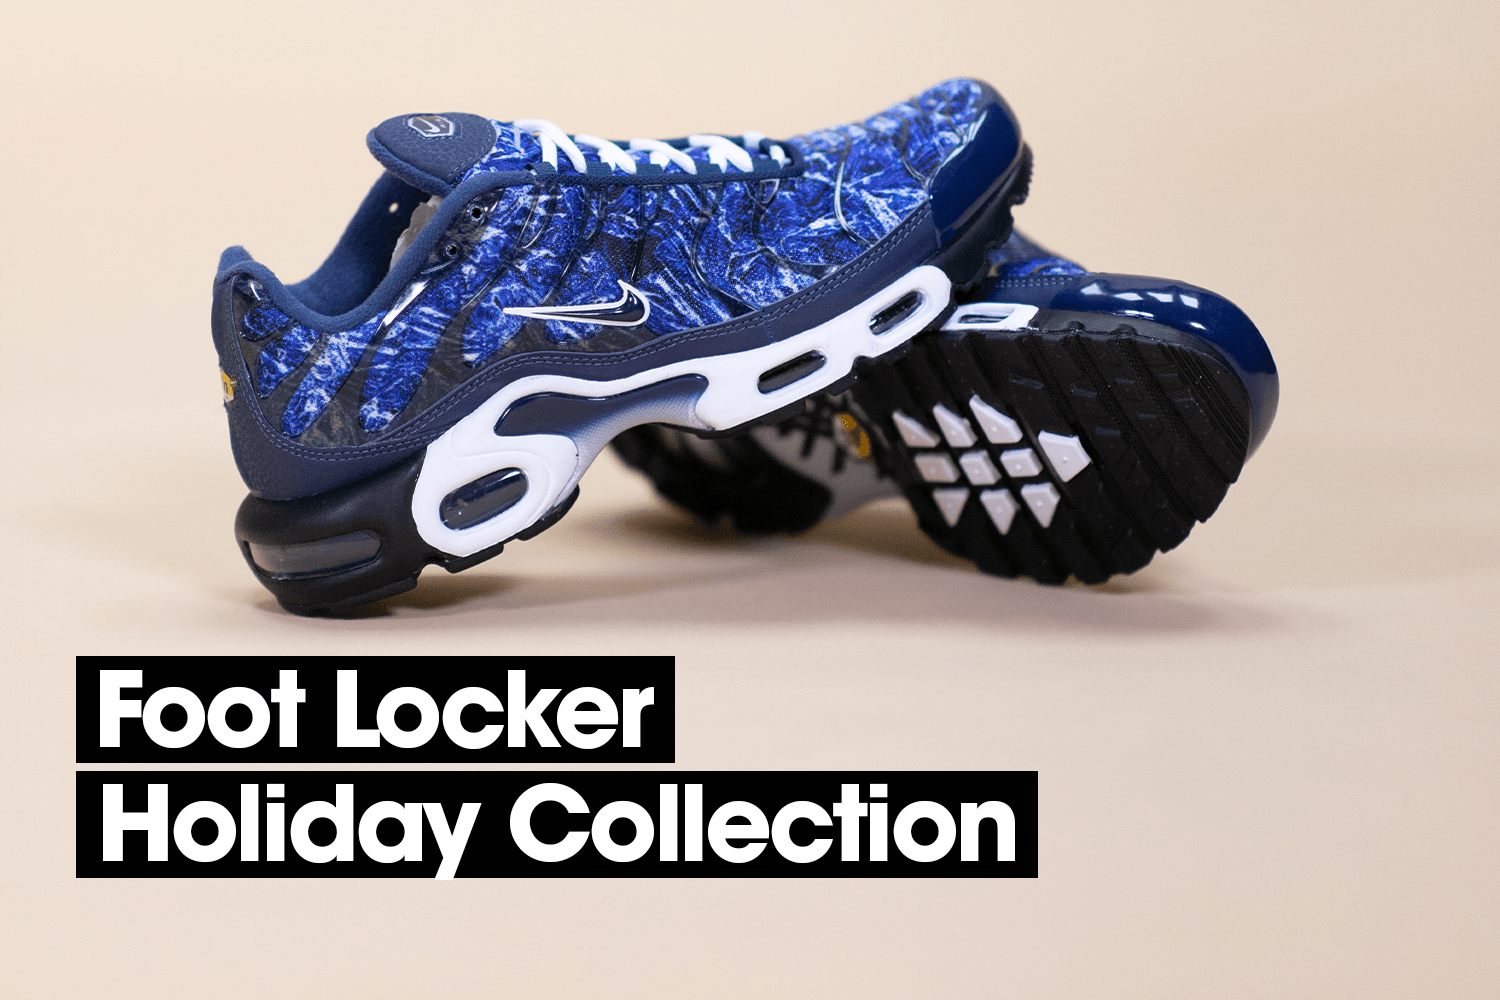 The best items in the Holiday collection at Foot Locker